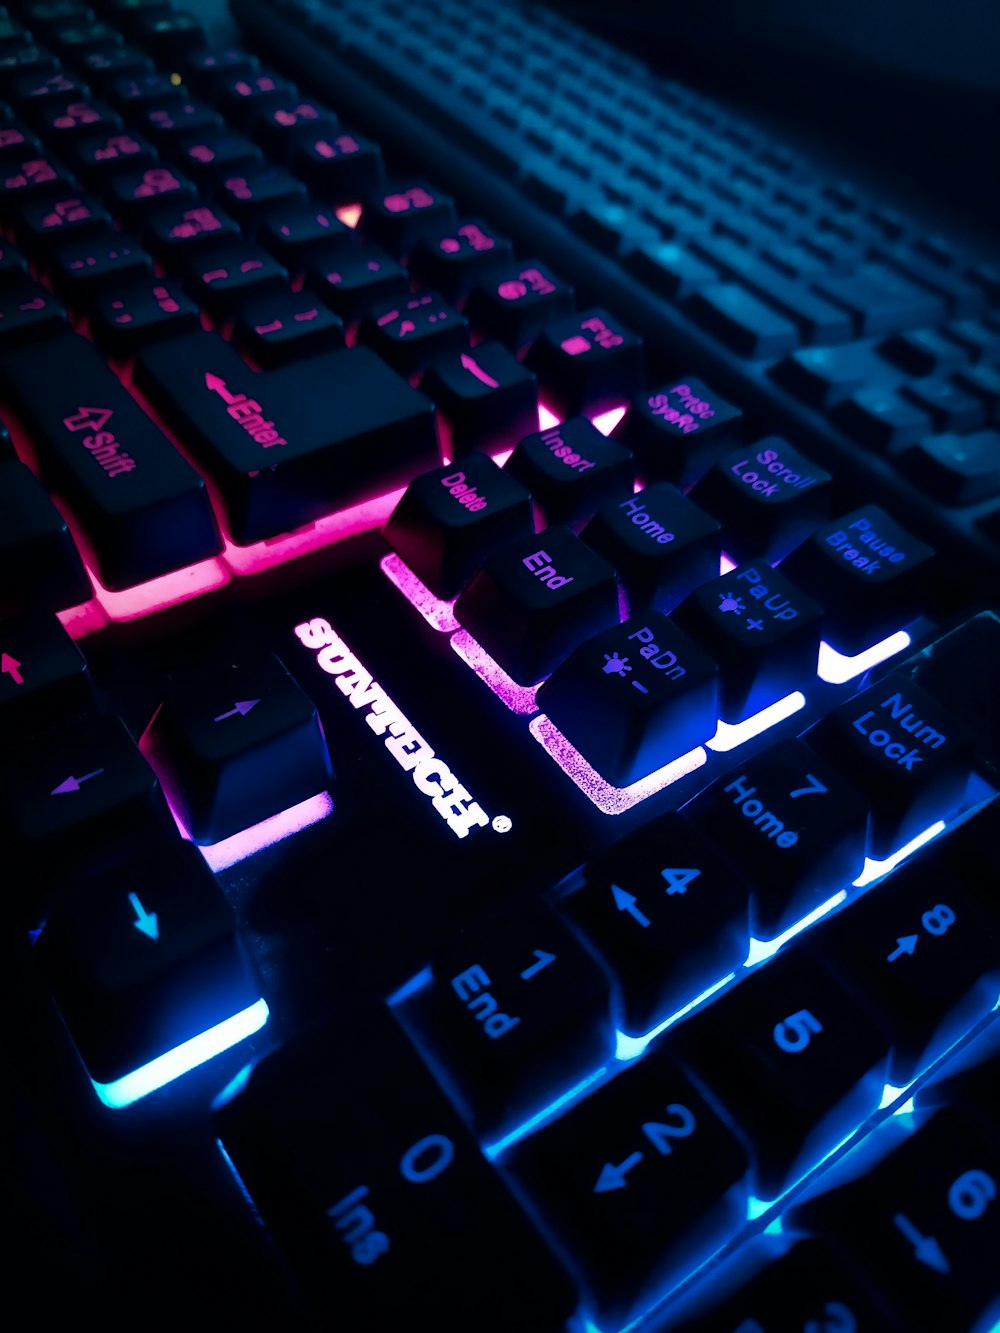 a close up of a computer keyboard with glowing keys